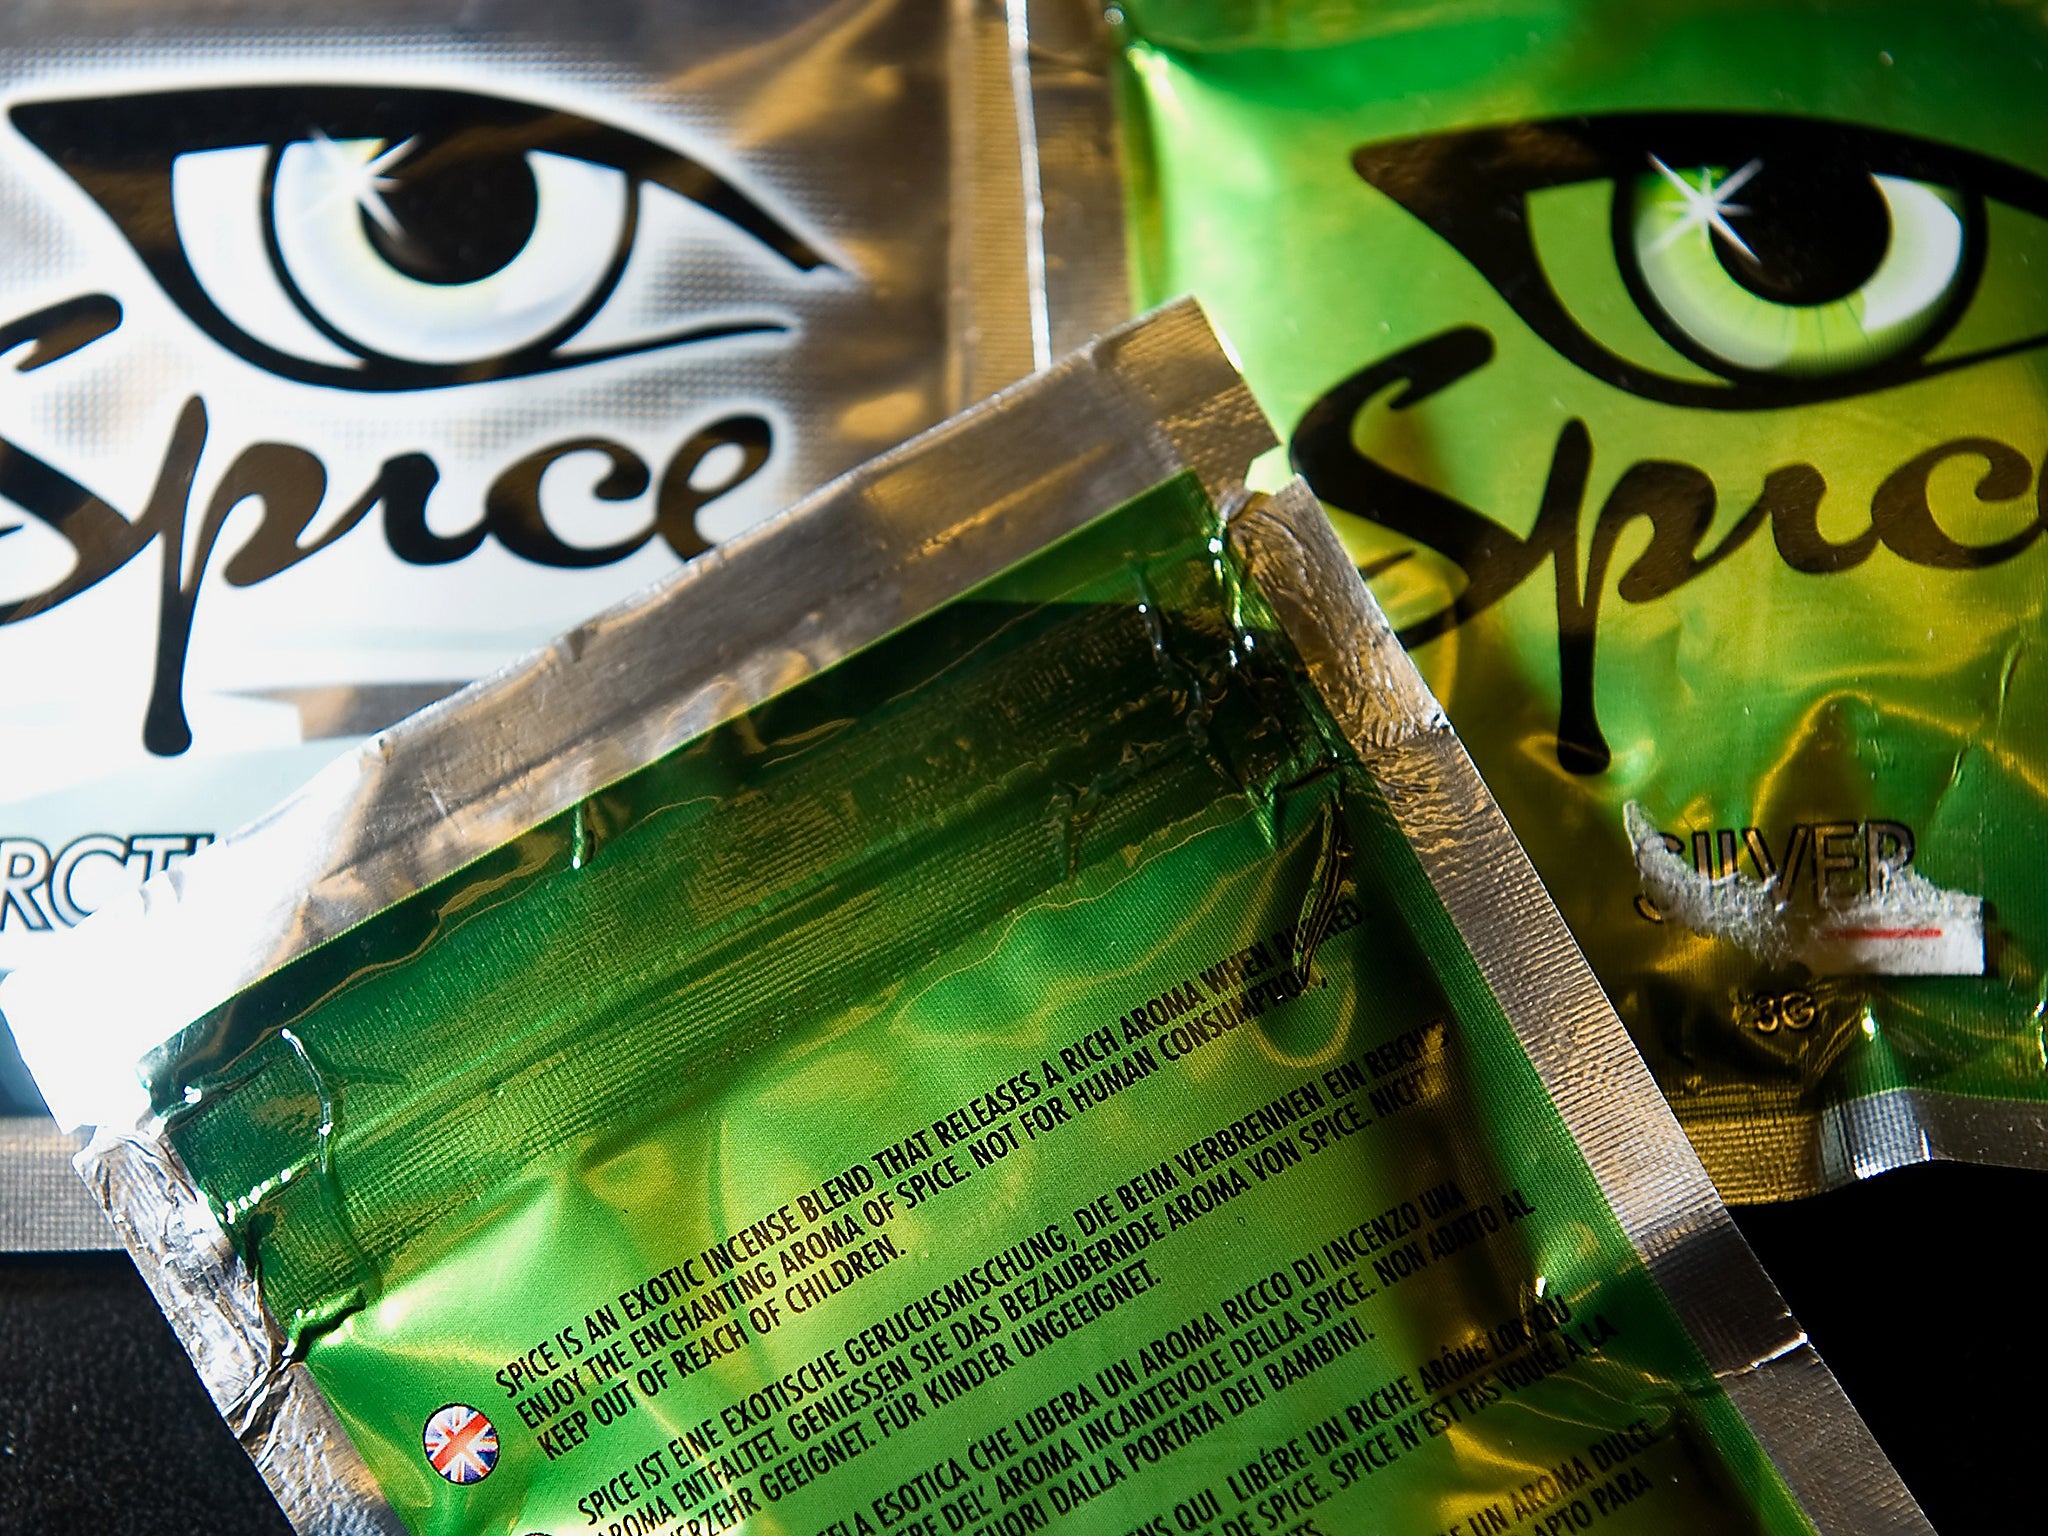 Spice is one of a growing multitude of brand names for synthetic cannabis